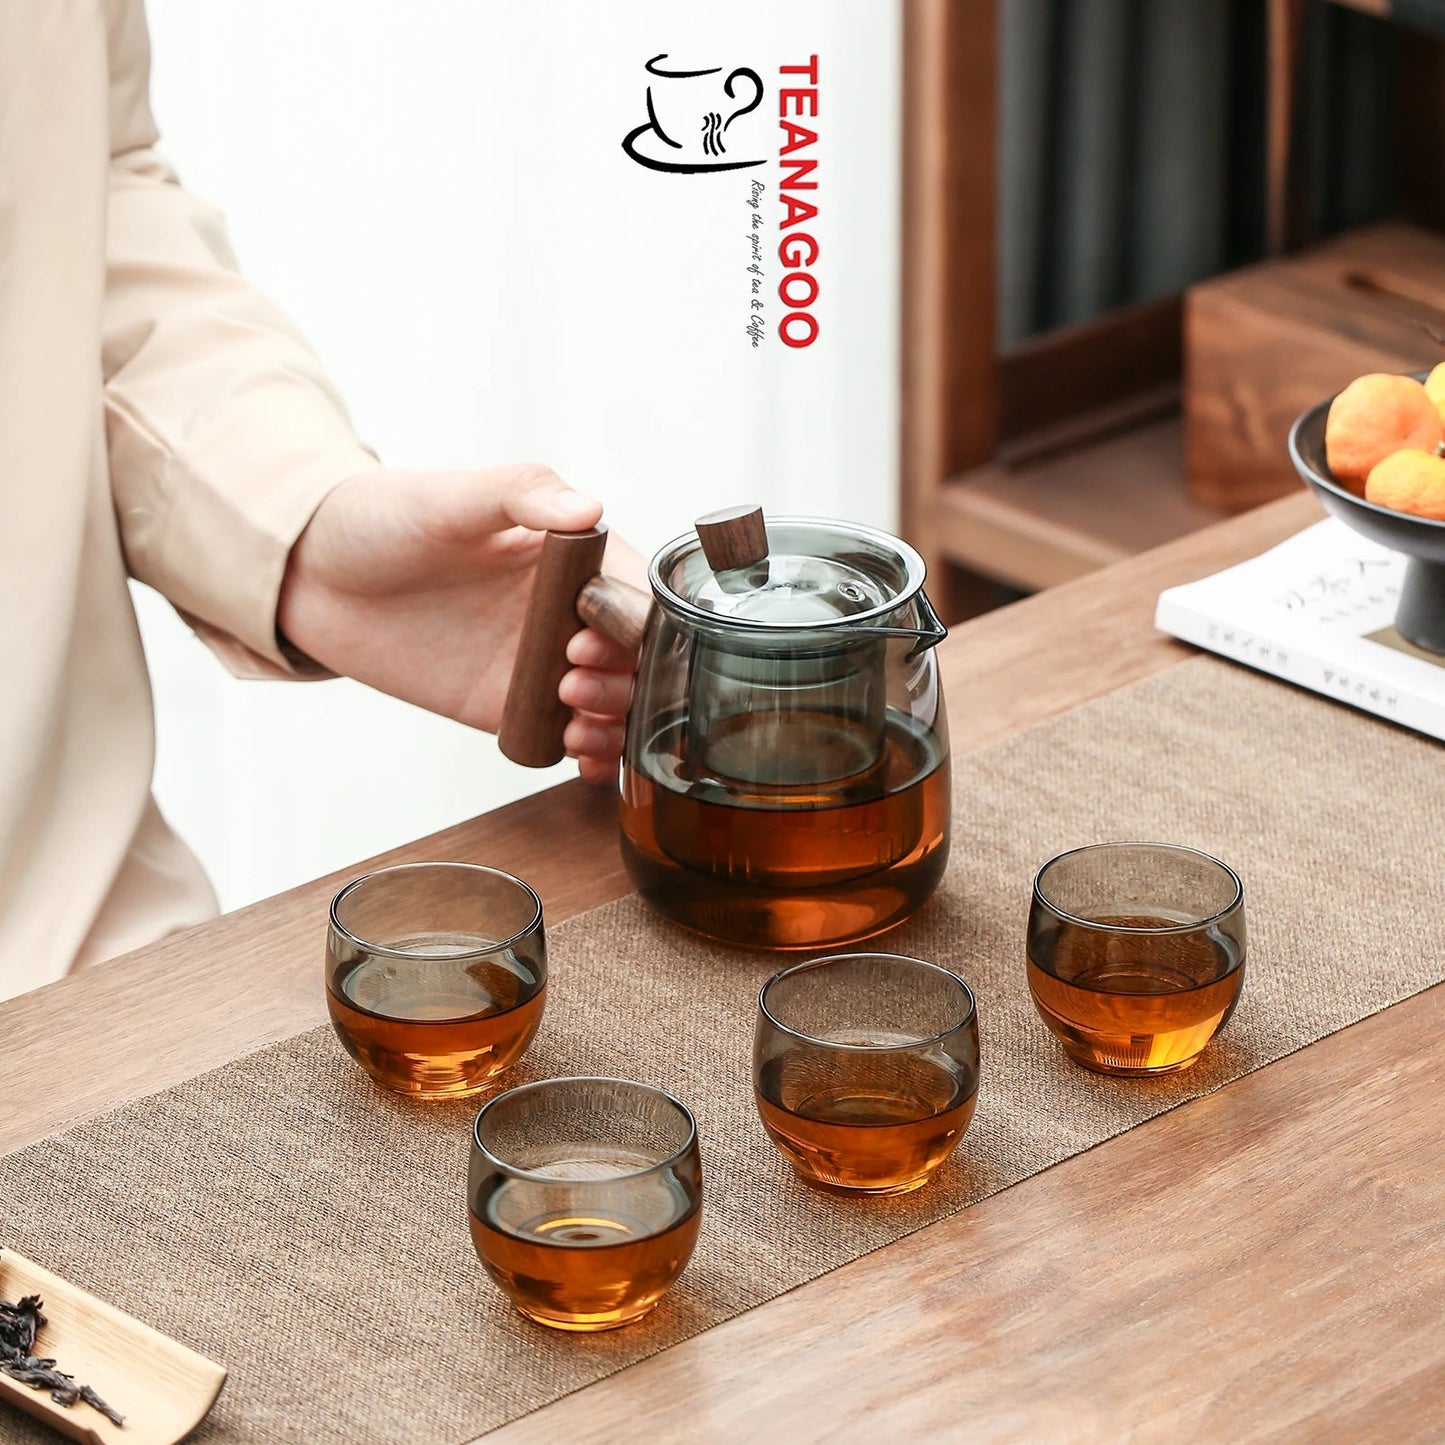 Handmade Glass Tea Set Portable Gongfu Teaware with Pot Infusion and Cups